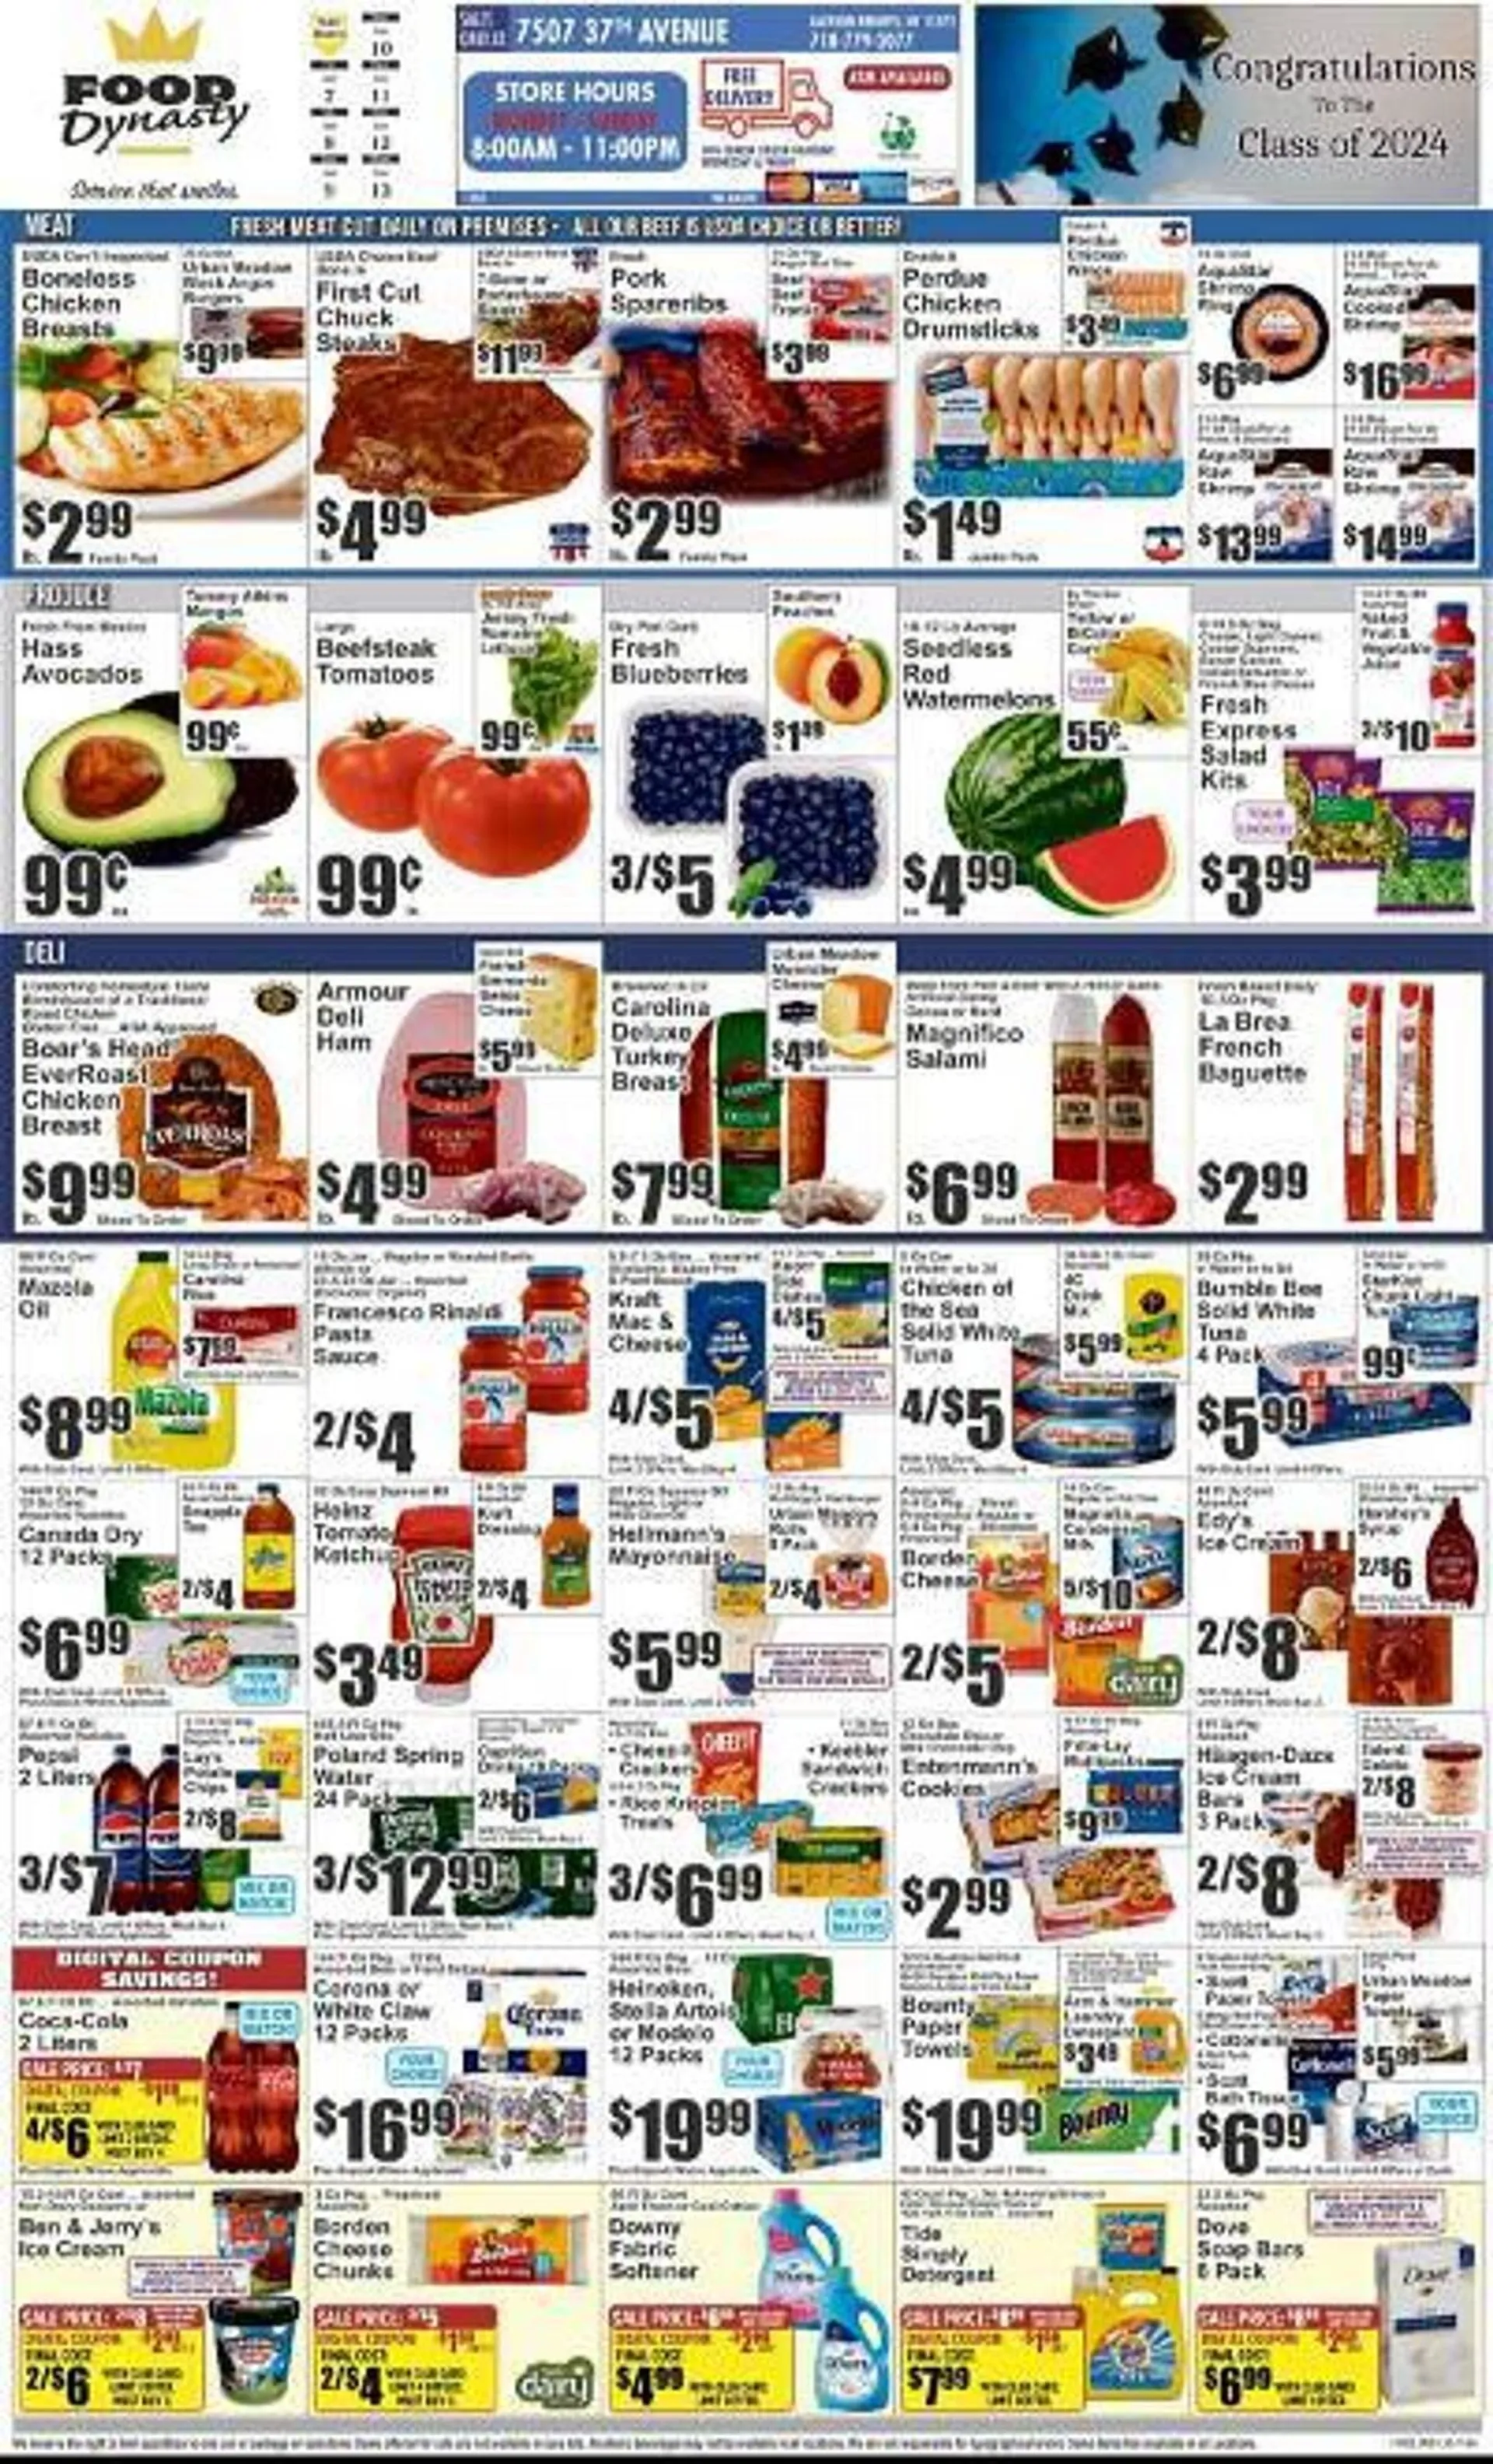 Almontes Food Dynasty Marketplace Weekly Ad - 1